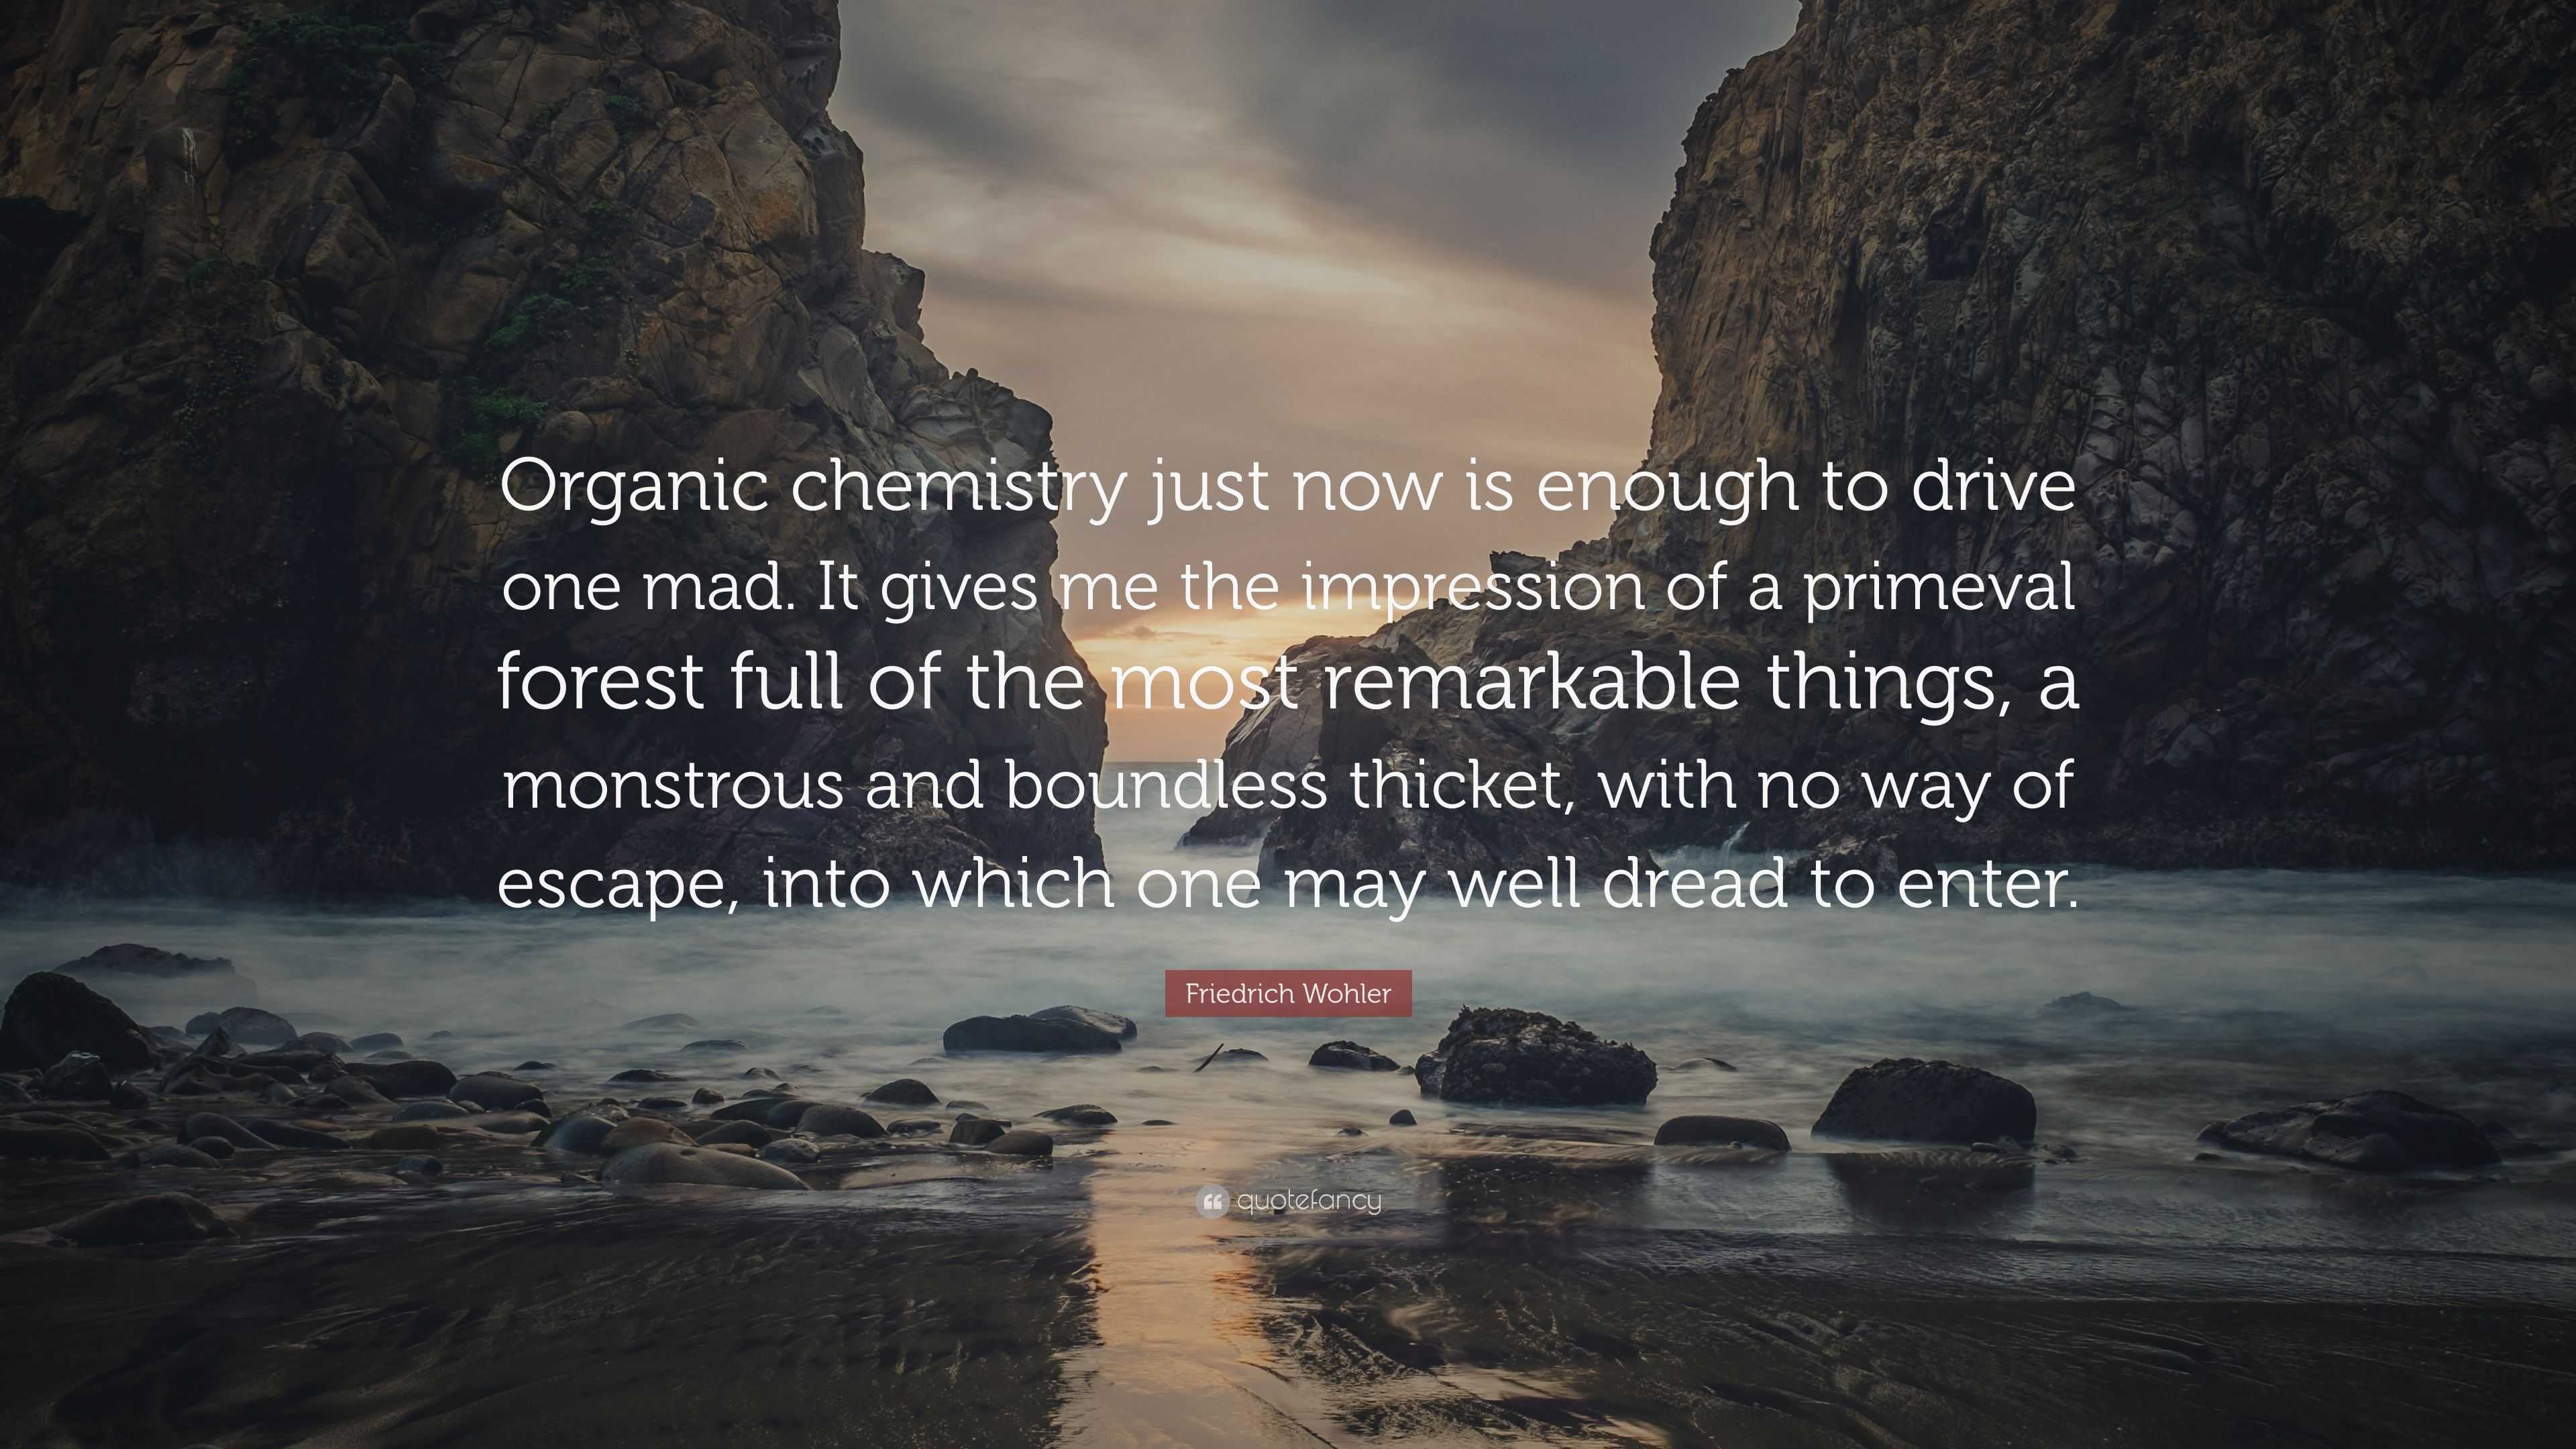 Friedrich Wohler Quote: “Organic chemistry just now is enough to drive